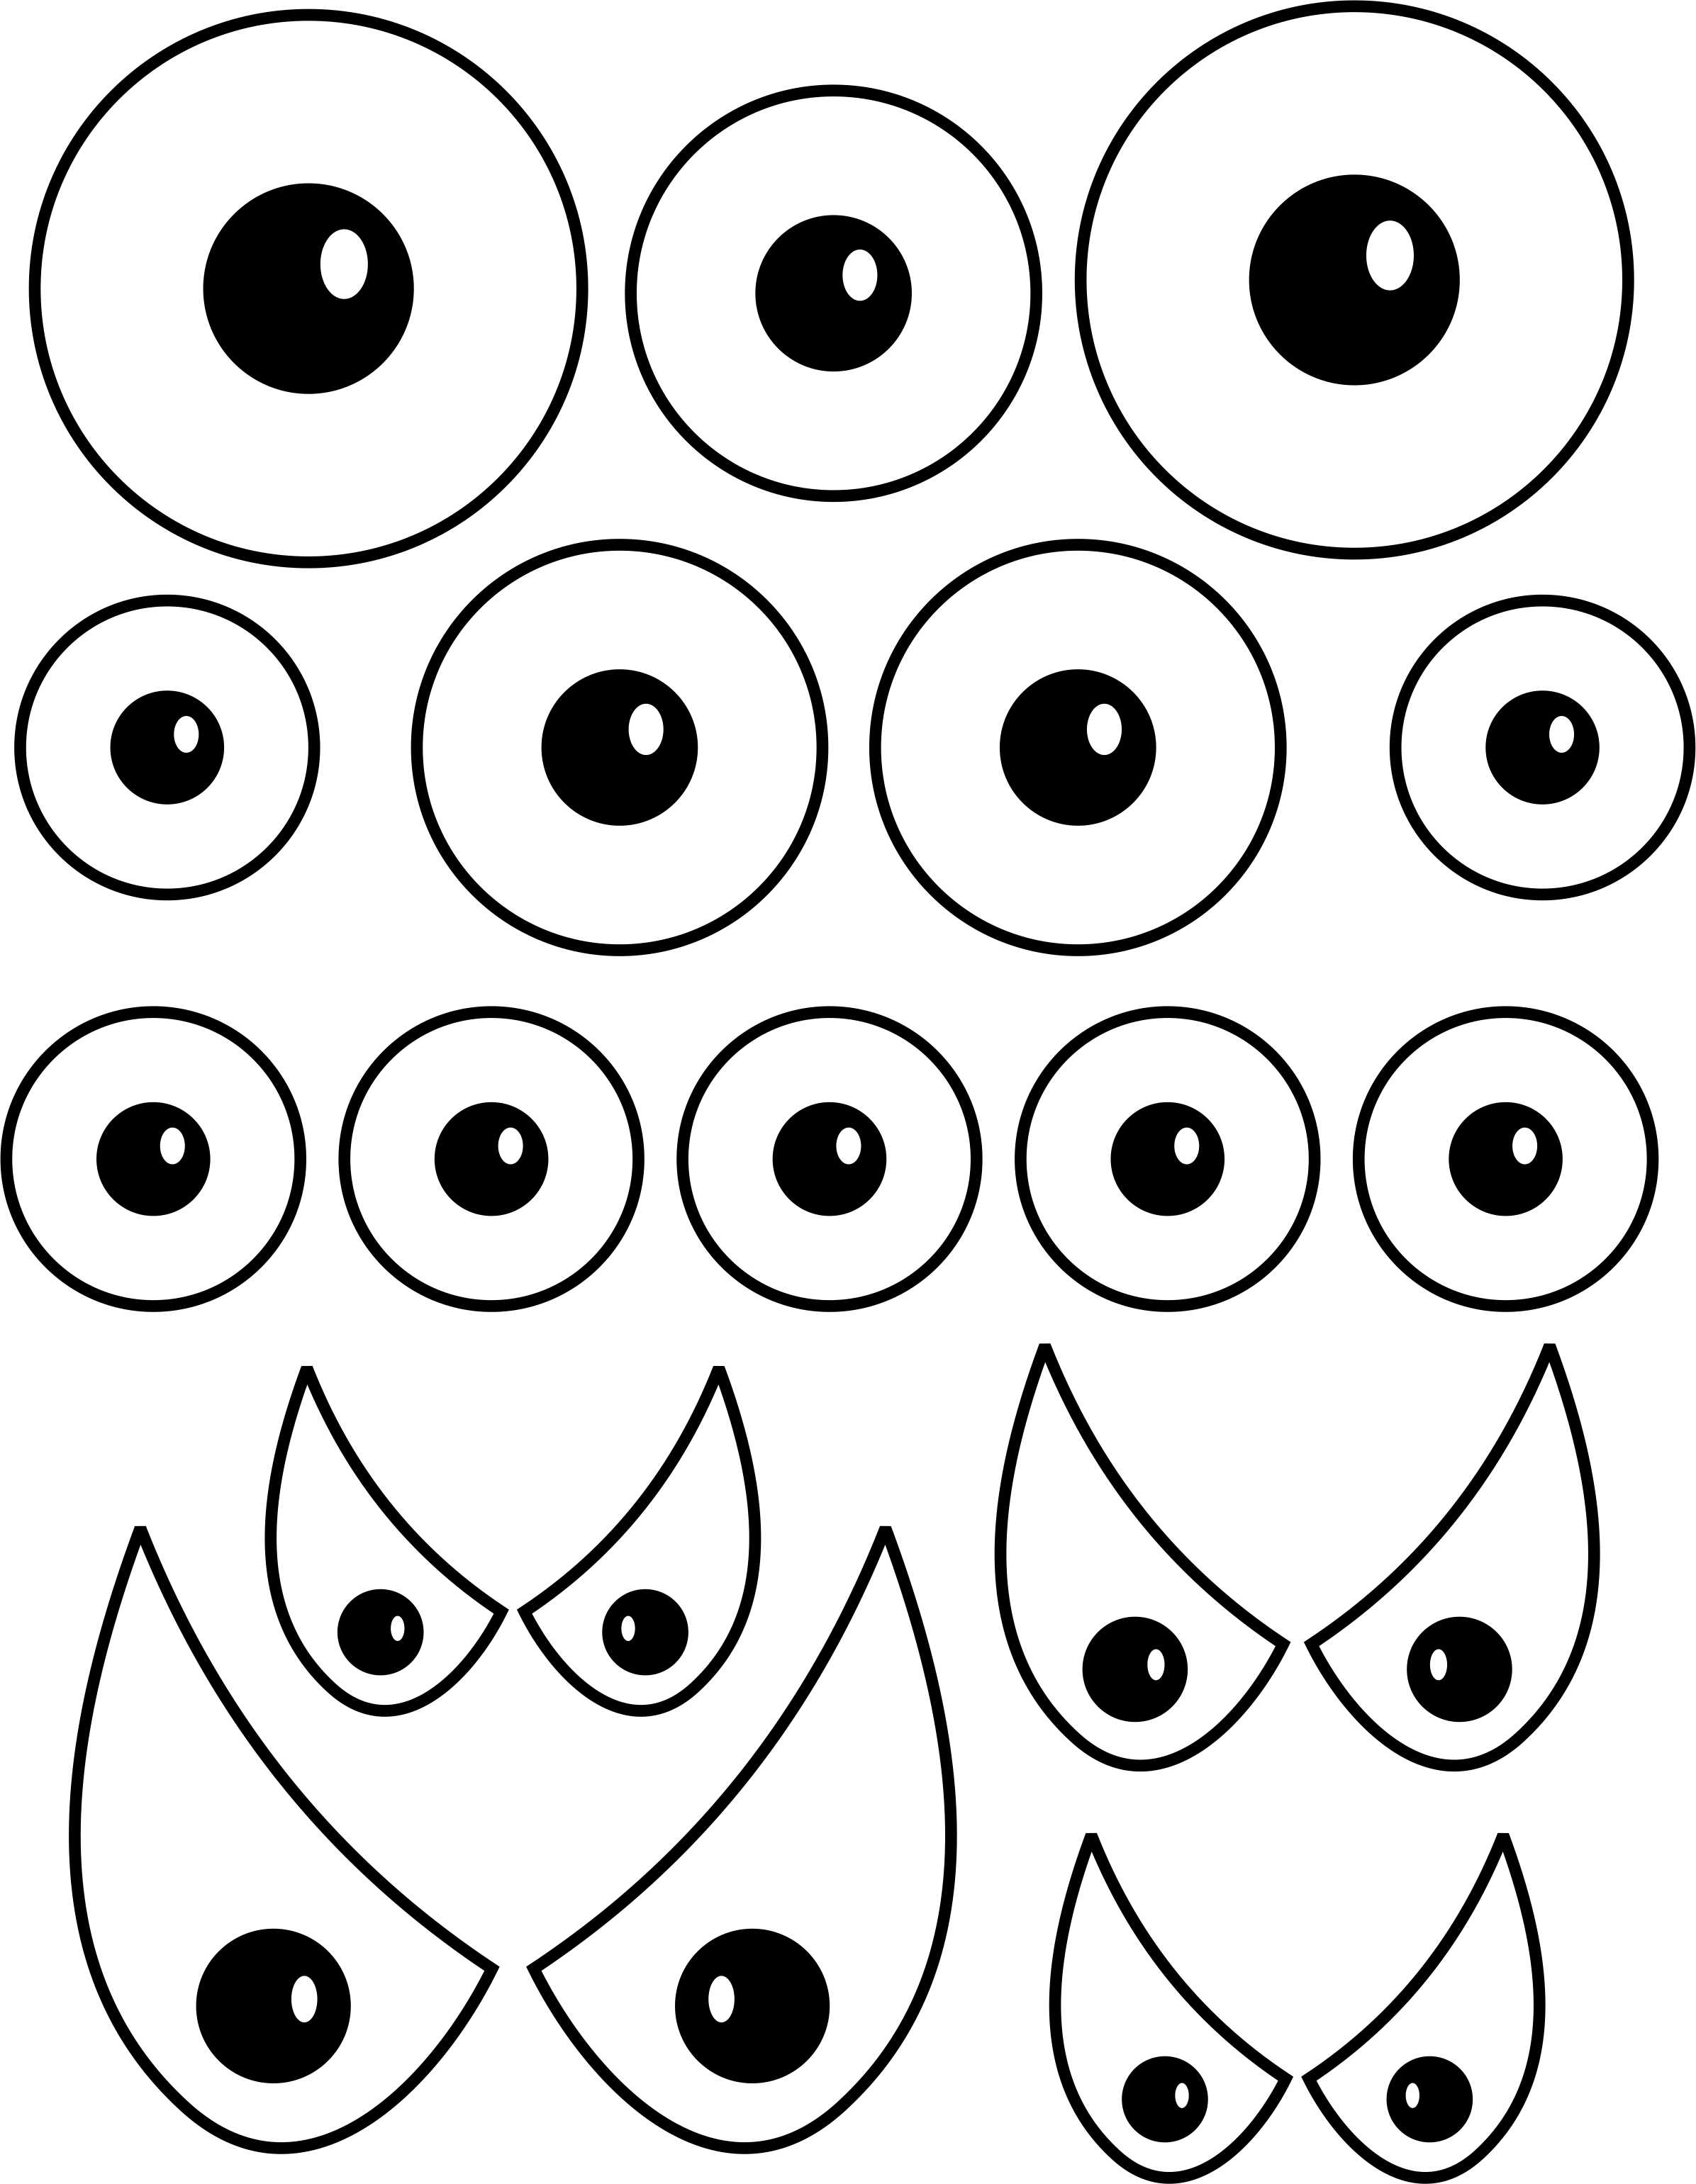 Eyes black and white spooky eyes clipart black and white.